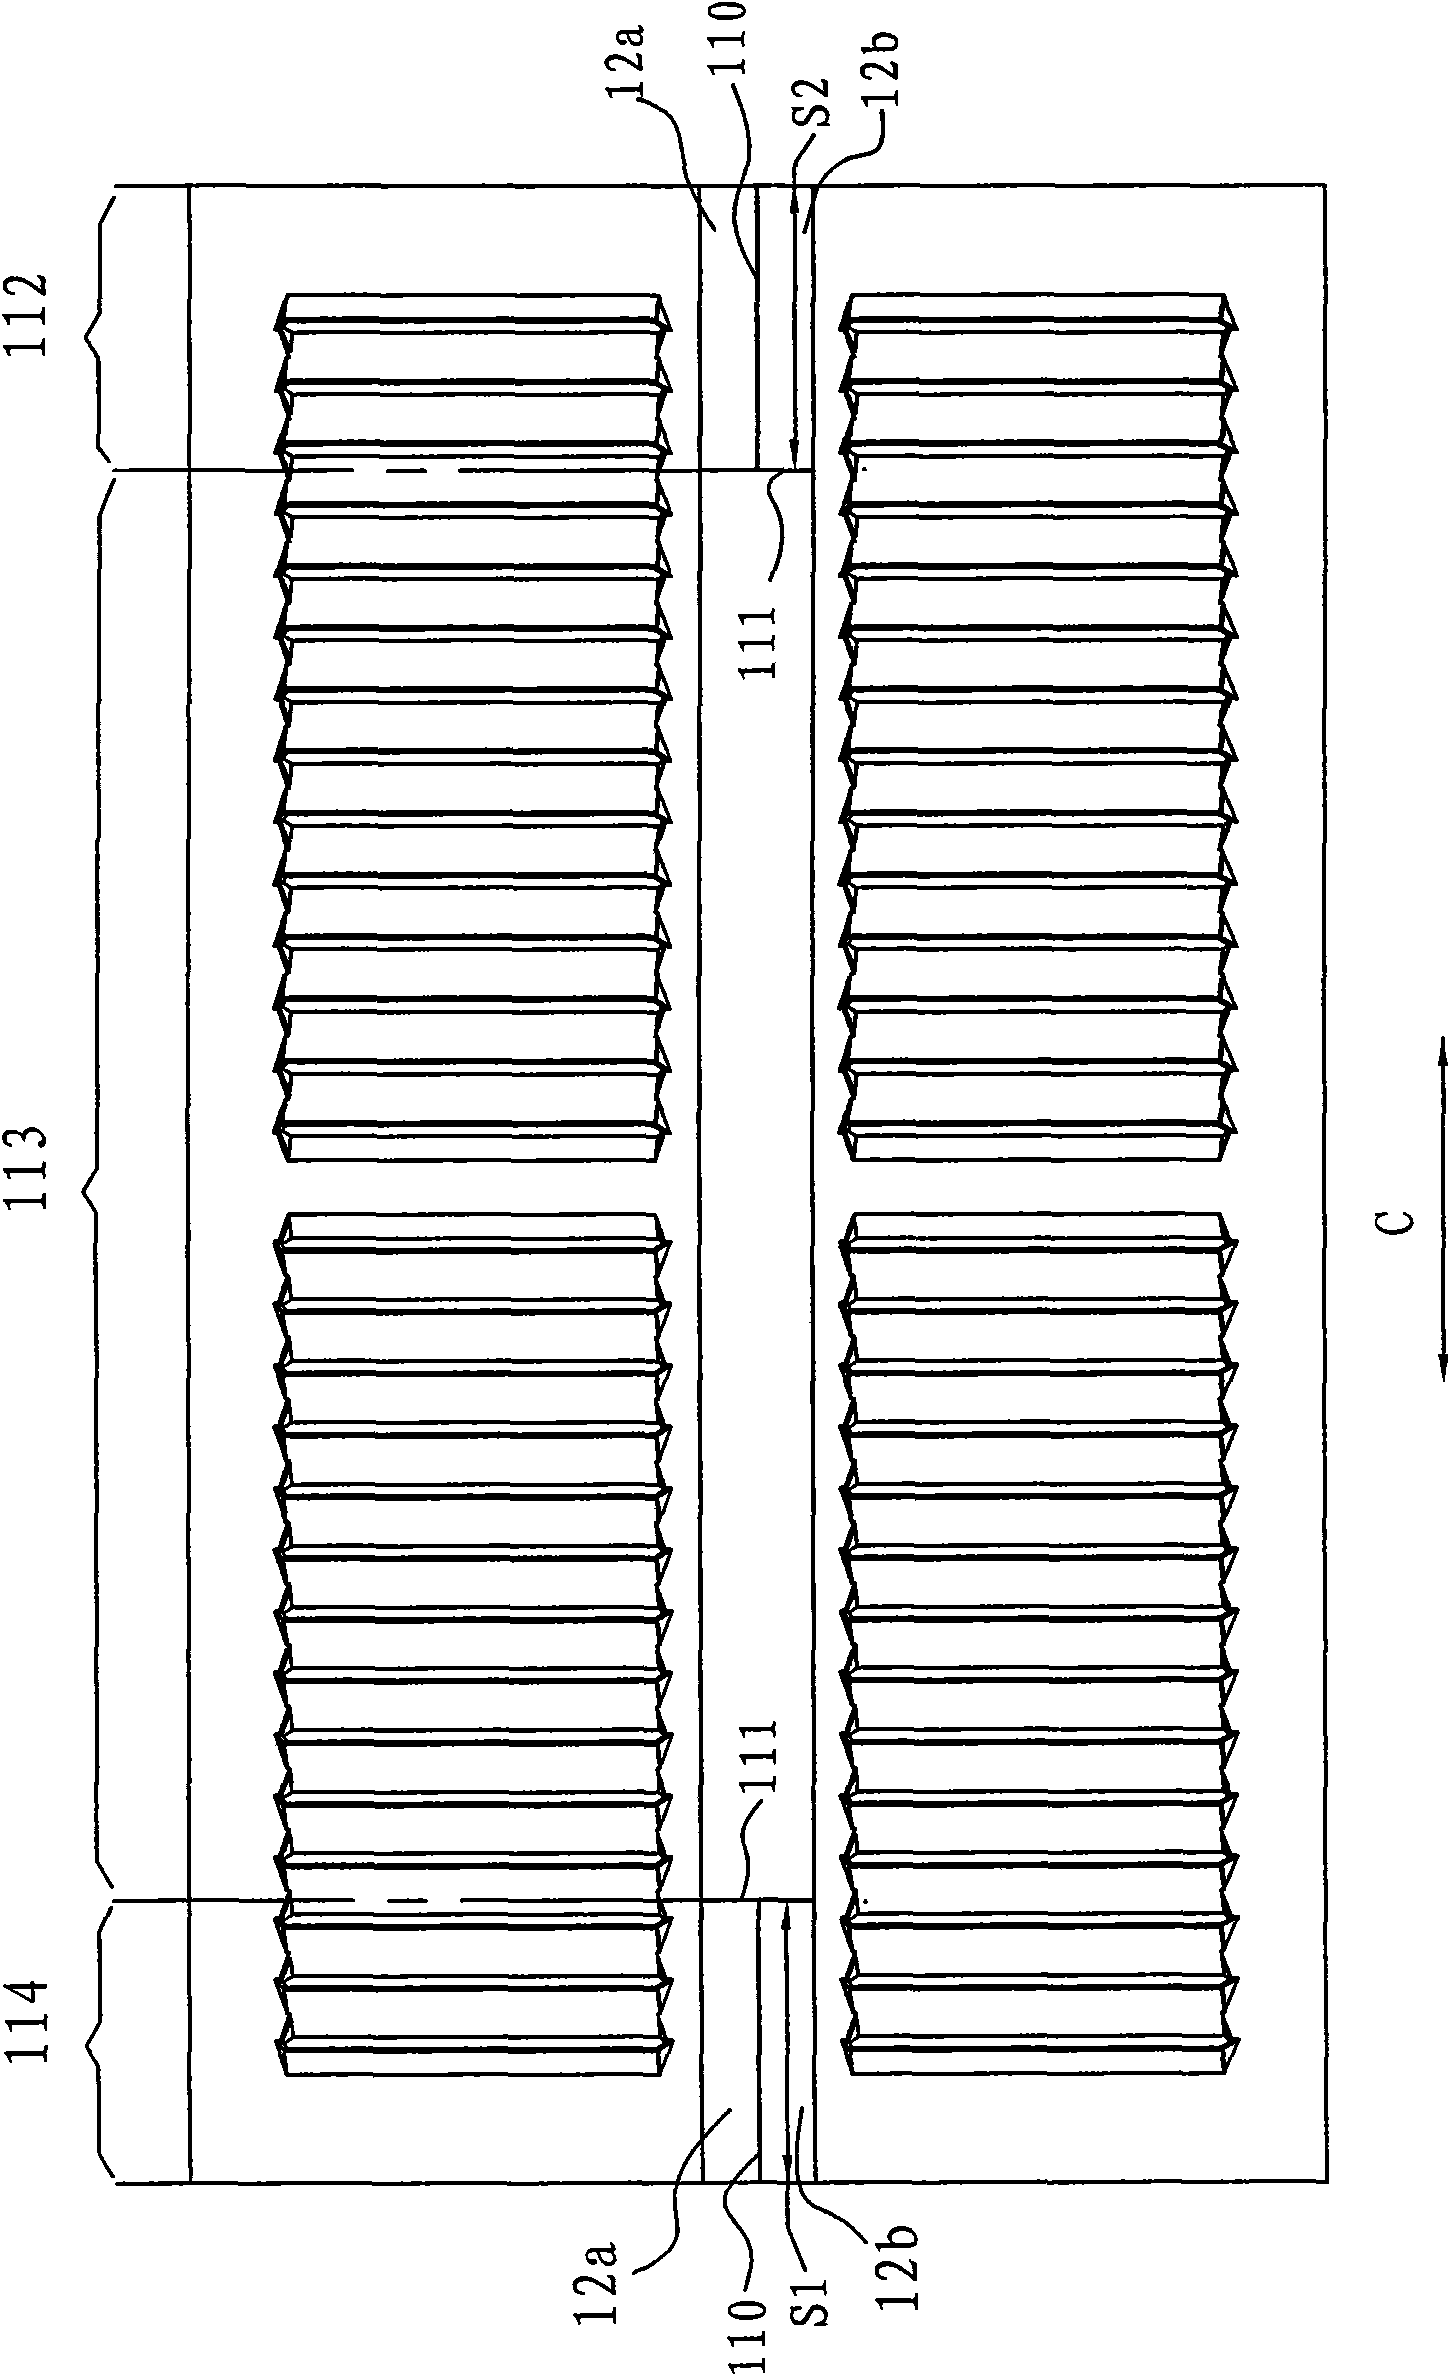 Fin and heat exchanger with same